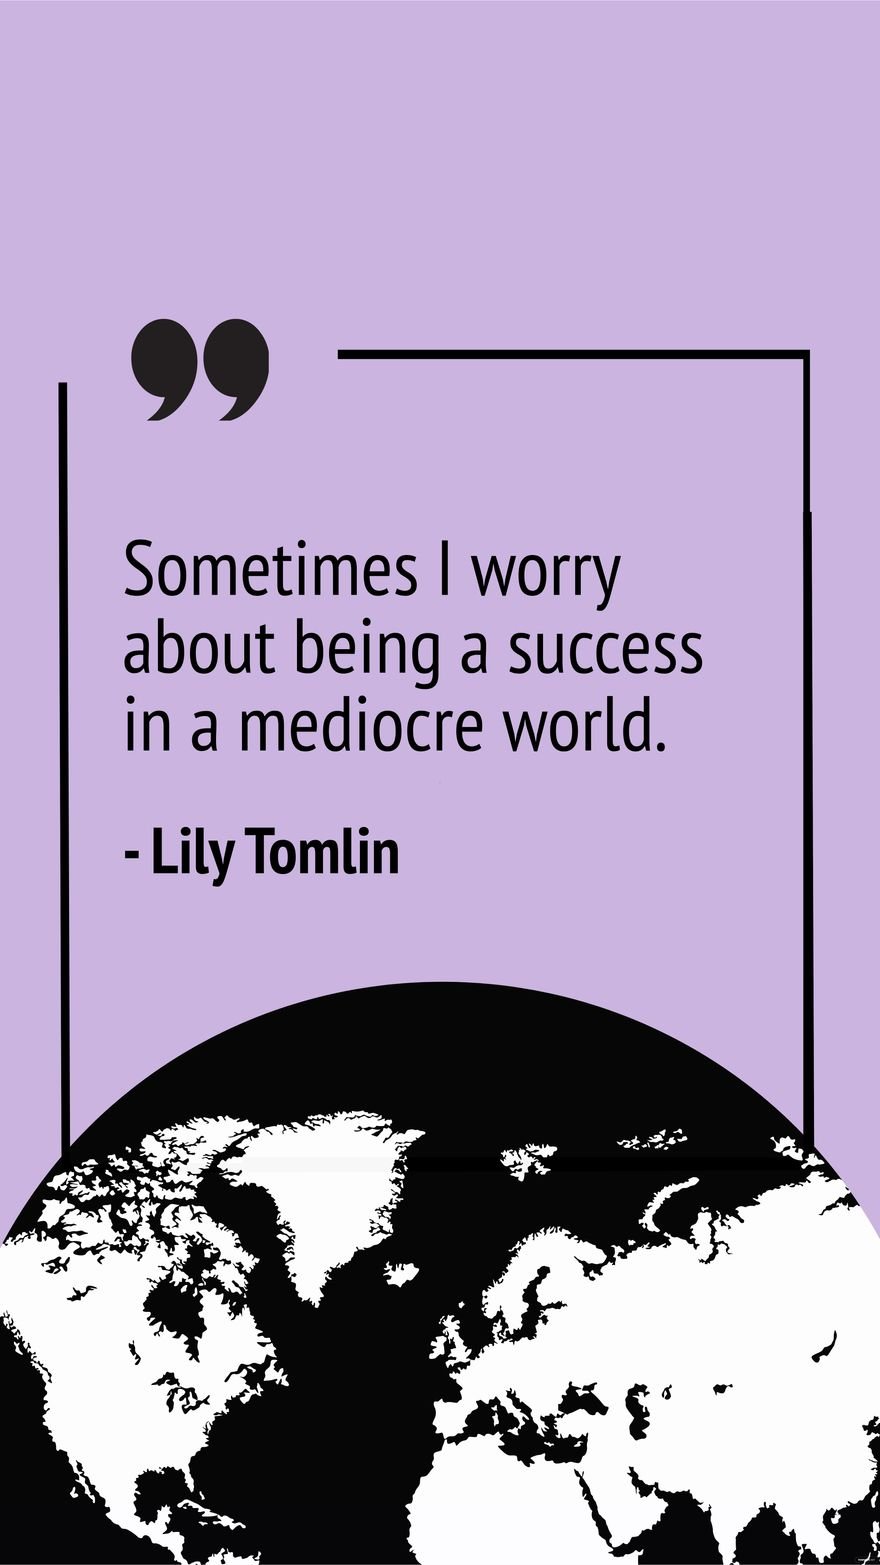 Free Lily Tomlin - Sometimes I worry about being a success in a mediocre world. in JPG